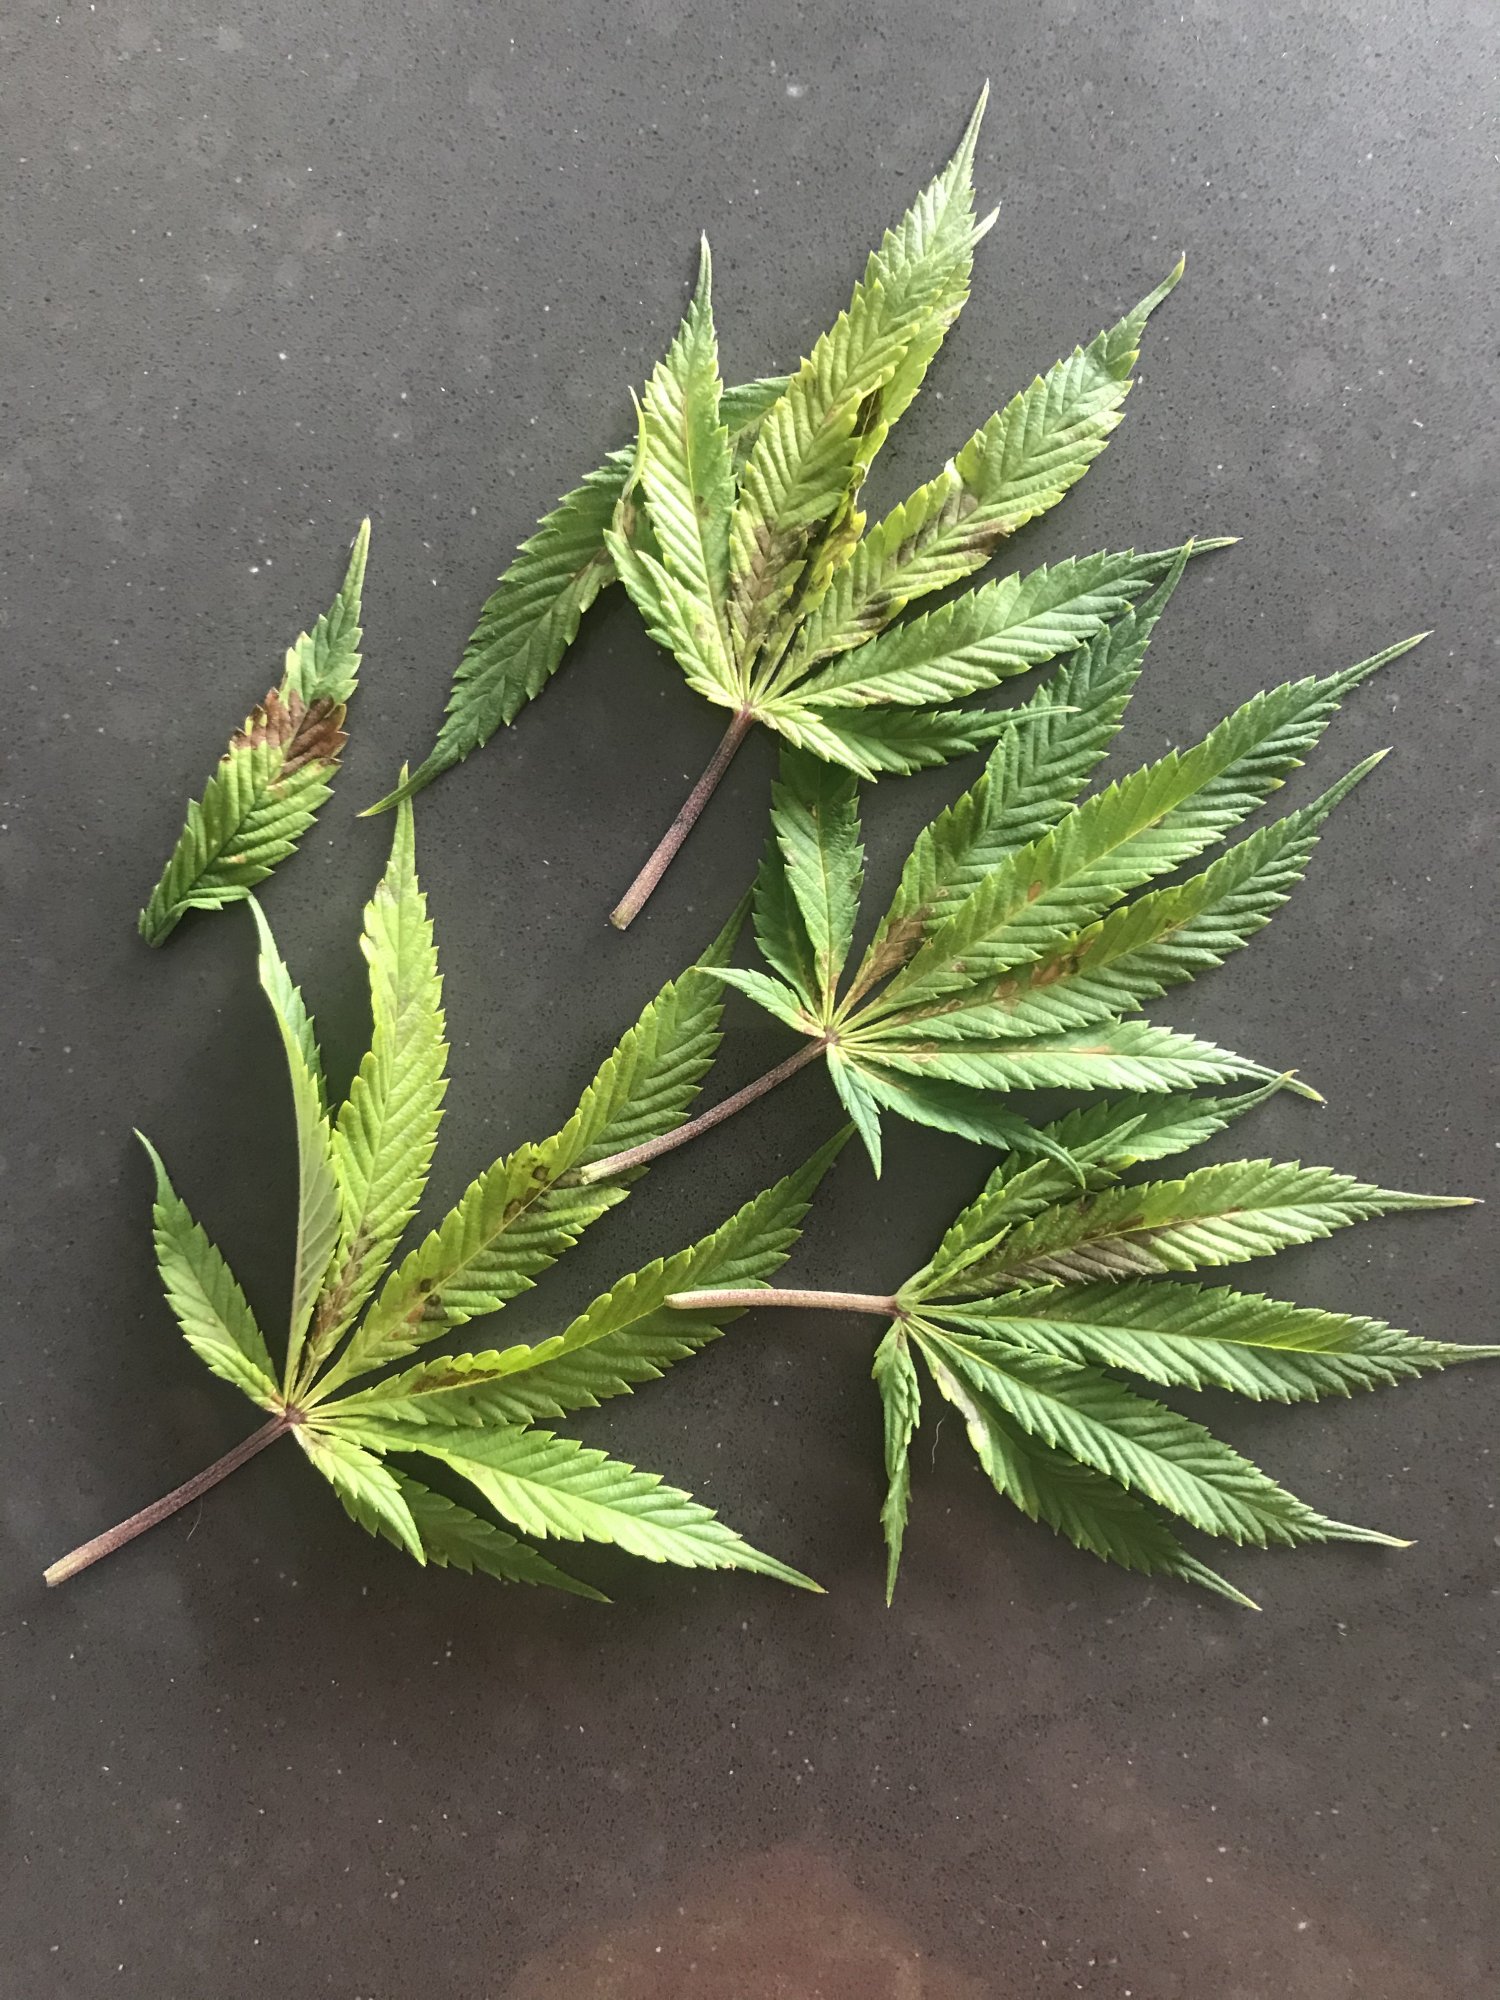 Help nutrient issue diagnosis needed